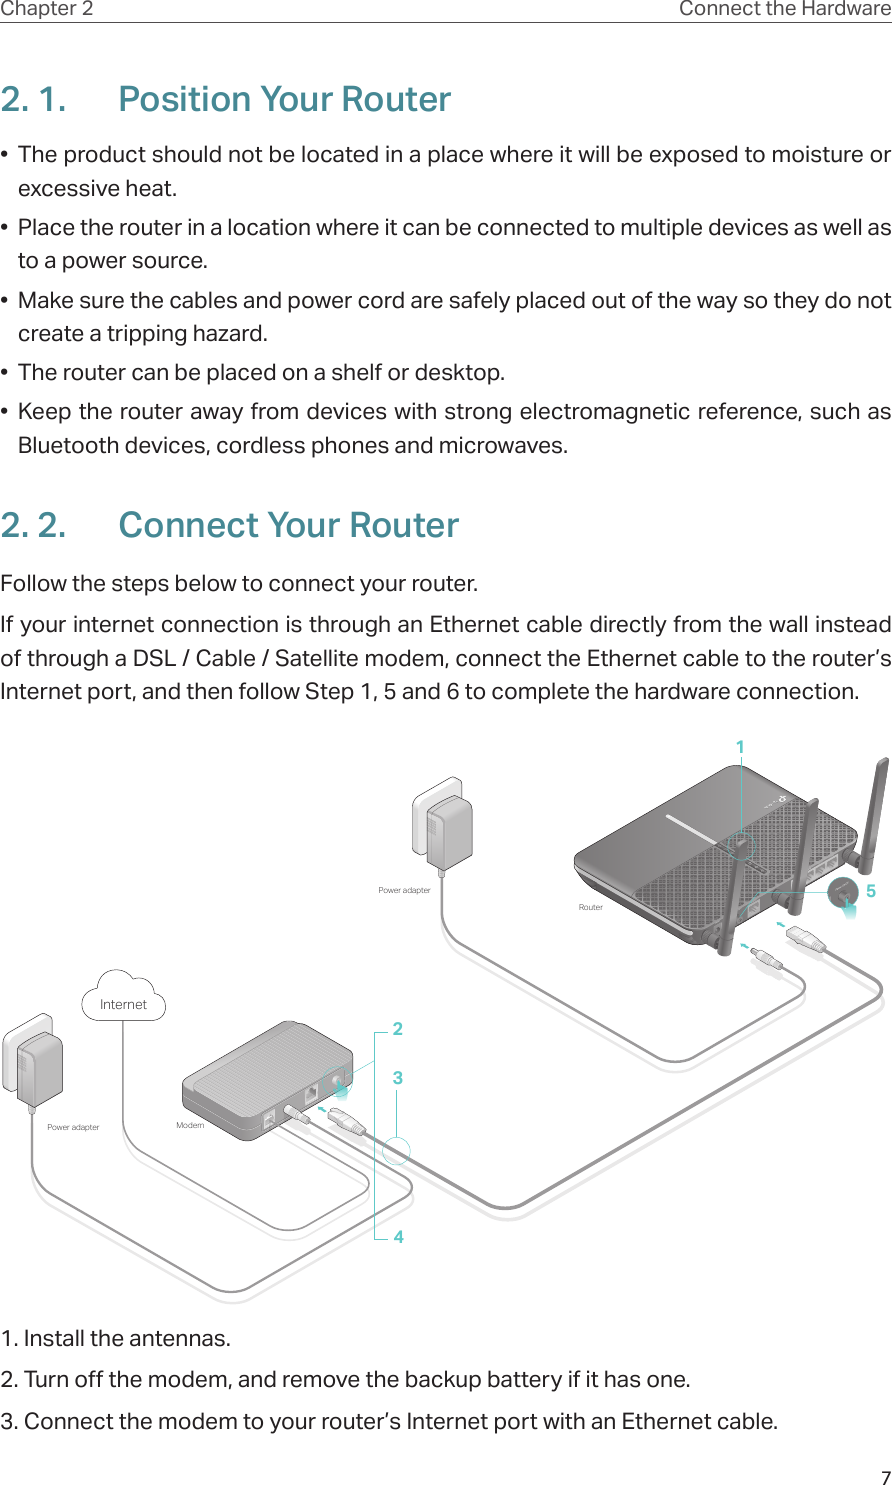 7Chapter 2 Connect the Hardware2. 1.  Position Your Router•  The product should not be located in a place where it will be exposed to moisture or excessive heat.•  Place the router in a location where it can be connected to multiple devices as well as to a power source.•  Make sure the cables and power cord are safely placed out of the way so they do not create a tripping hazard.•  The router can be placed on a shelf or desktop.•  Keep the router away from devices with strong electromagnetic reference, such as Bluetooth devices, cordless phones and microwaves.2. 2.  Connect Your RouterFollow the steps below to connect your router.If your internet connection is through an Ethernet cable directly from the wall instead of through a DSL / Cable / Satellite modem, connect the Ethernet cable to the router’s Internet port, and then follow Step 1, 5 and 6 to complete the hardware connection.5ModemPower adapterPower adapterRouter2134Internet1. Install the antennas.2. Turn off the modem, and remove the backup battery if it has one.3. Connect the modem to your router’s Internet port with an Ethernet cable.